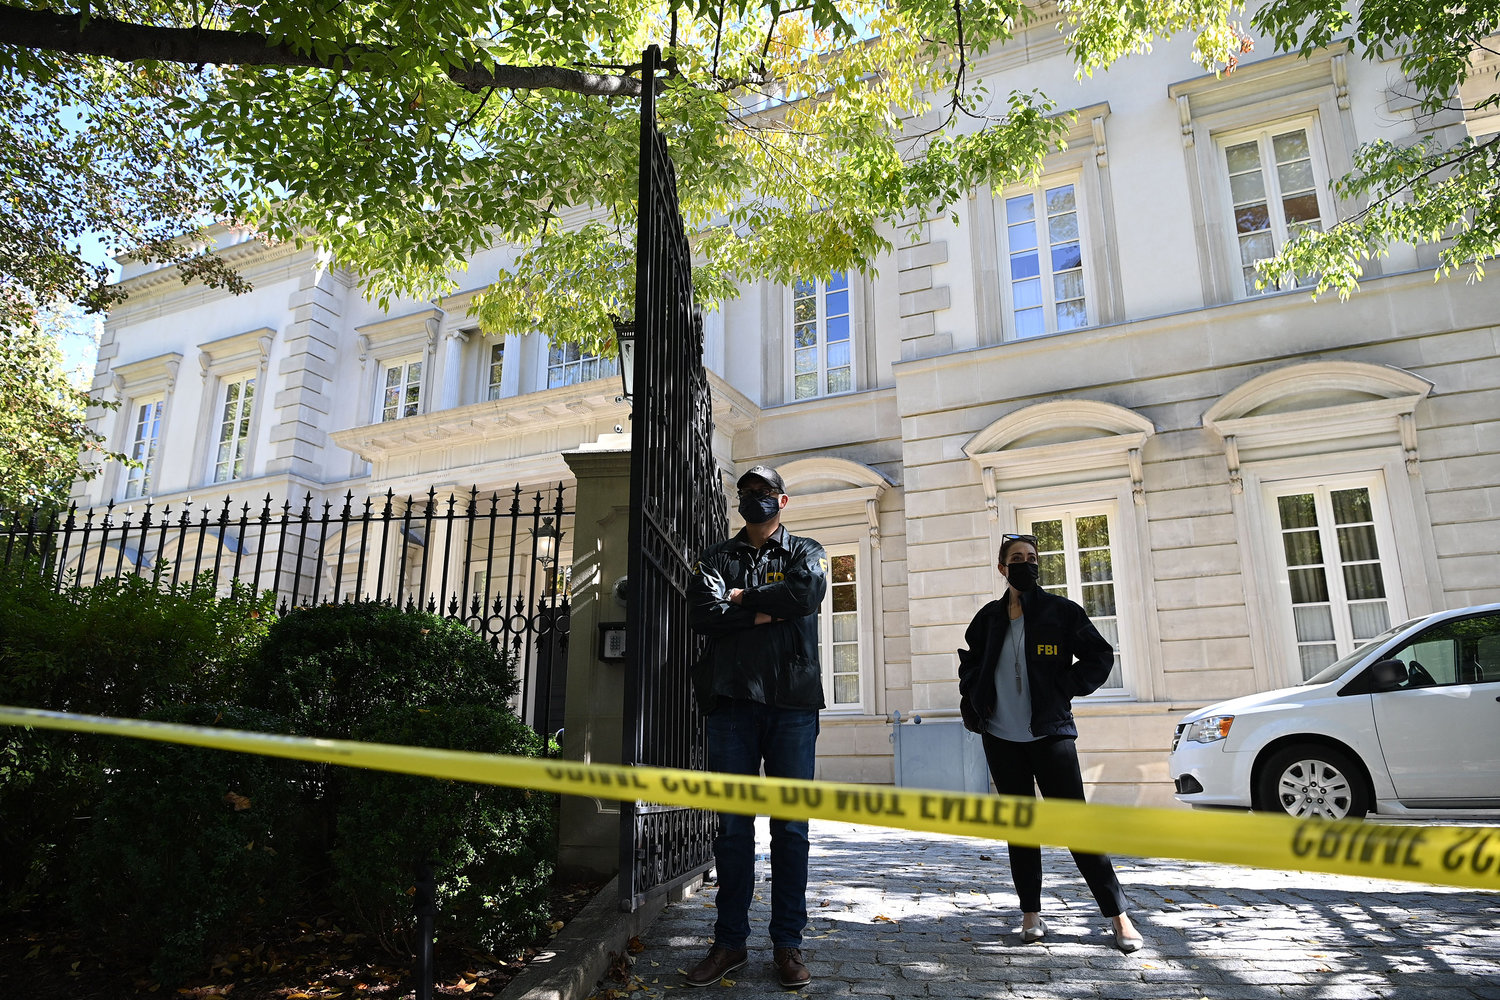 FBI agents stand guard outside the home of Russian oligarch Oleg Deripaska in Washington, D.C., on Oct. 19, 2021. FBI agents were conducting a search of the home, conducting "court-authorized law enforcement activity" at the home in a fashionable district of the U.S. capital. (Mandel Ngan/AFP/Getty Images/TNS)